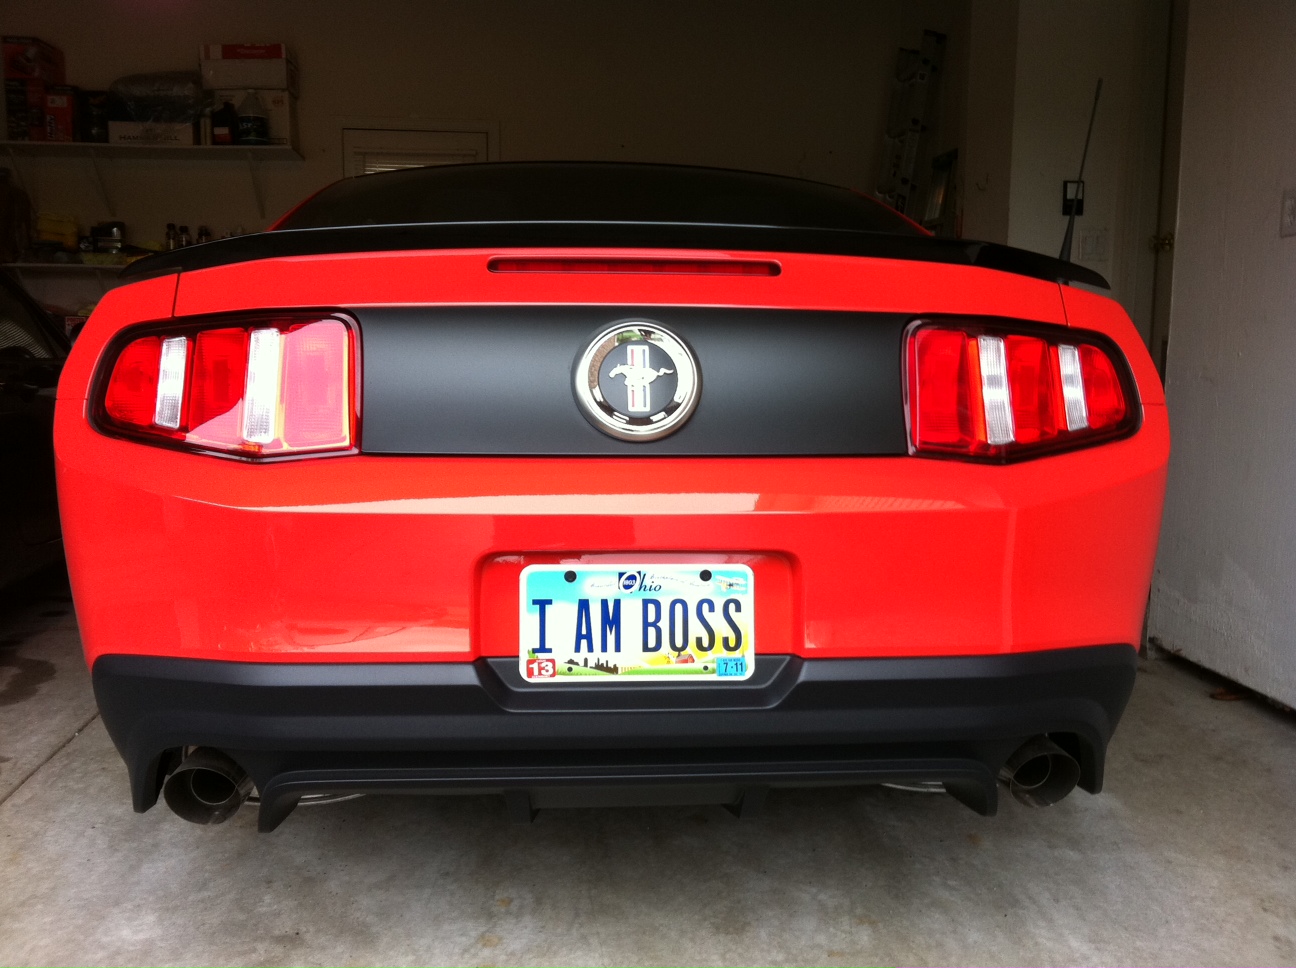 personalized-license-plates-for-your-boss-the-mustang-source-ford